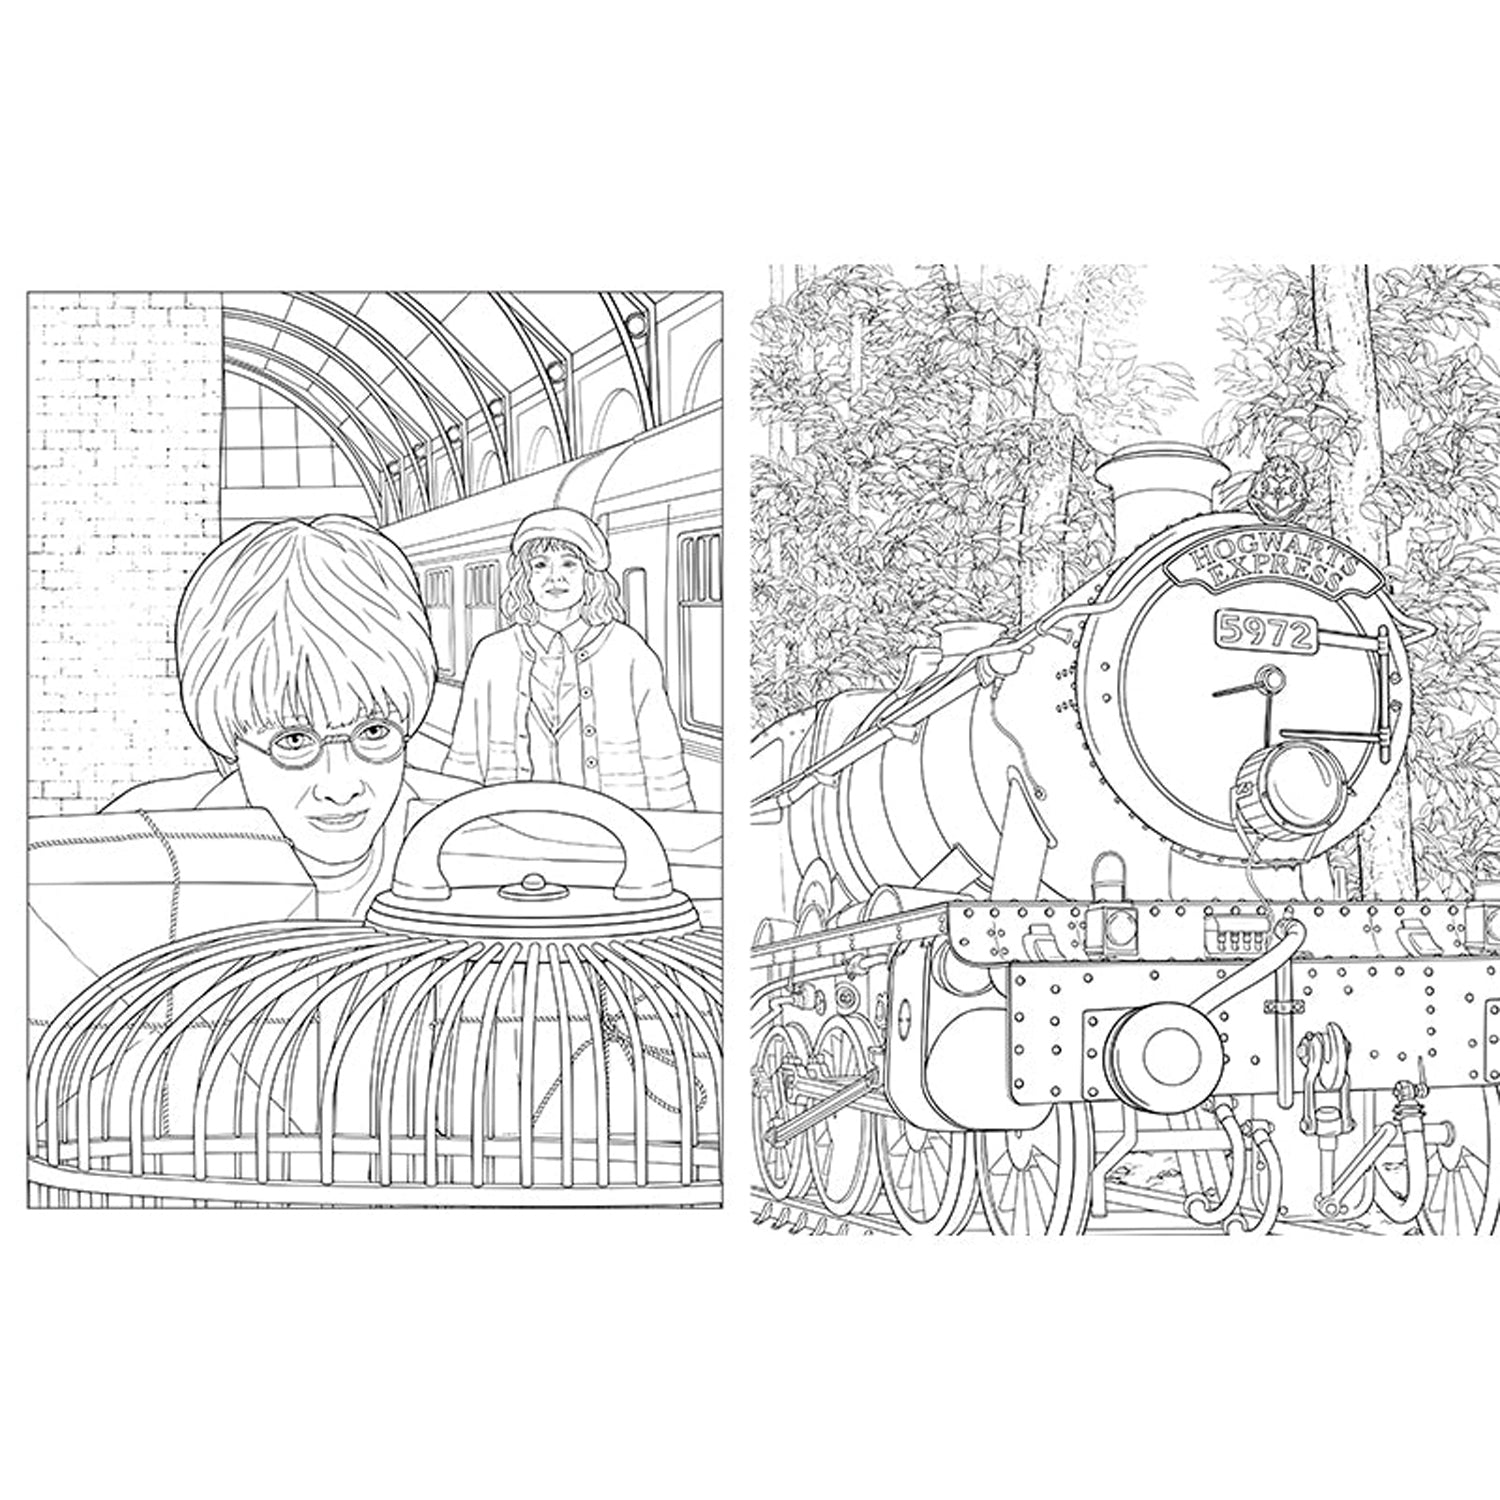 The Official Funko Pop! Harry Potter Coloring Book by Insight